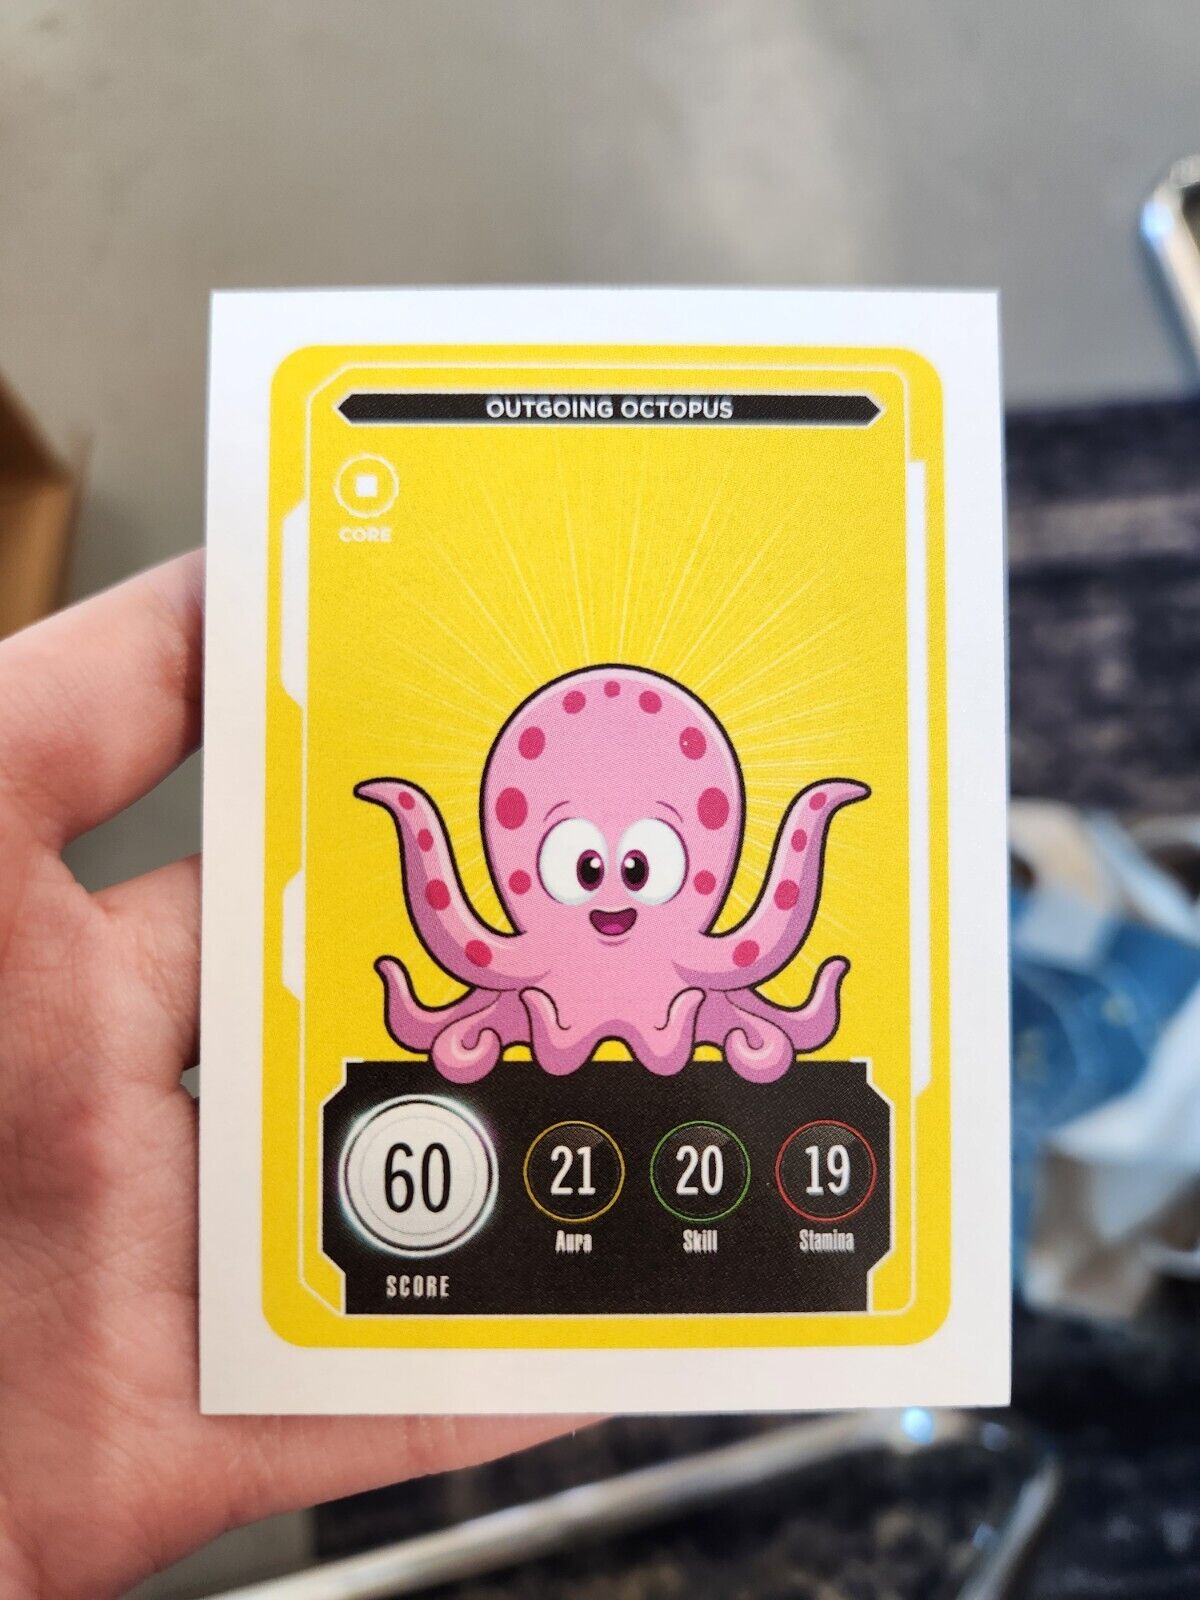 Outgoing Octopus - Veefriends Series 2 - Compete & Collect Core - 